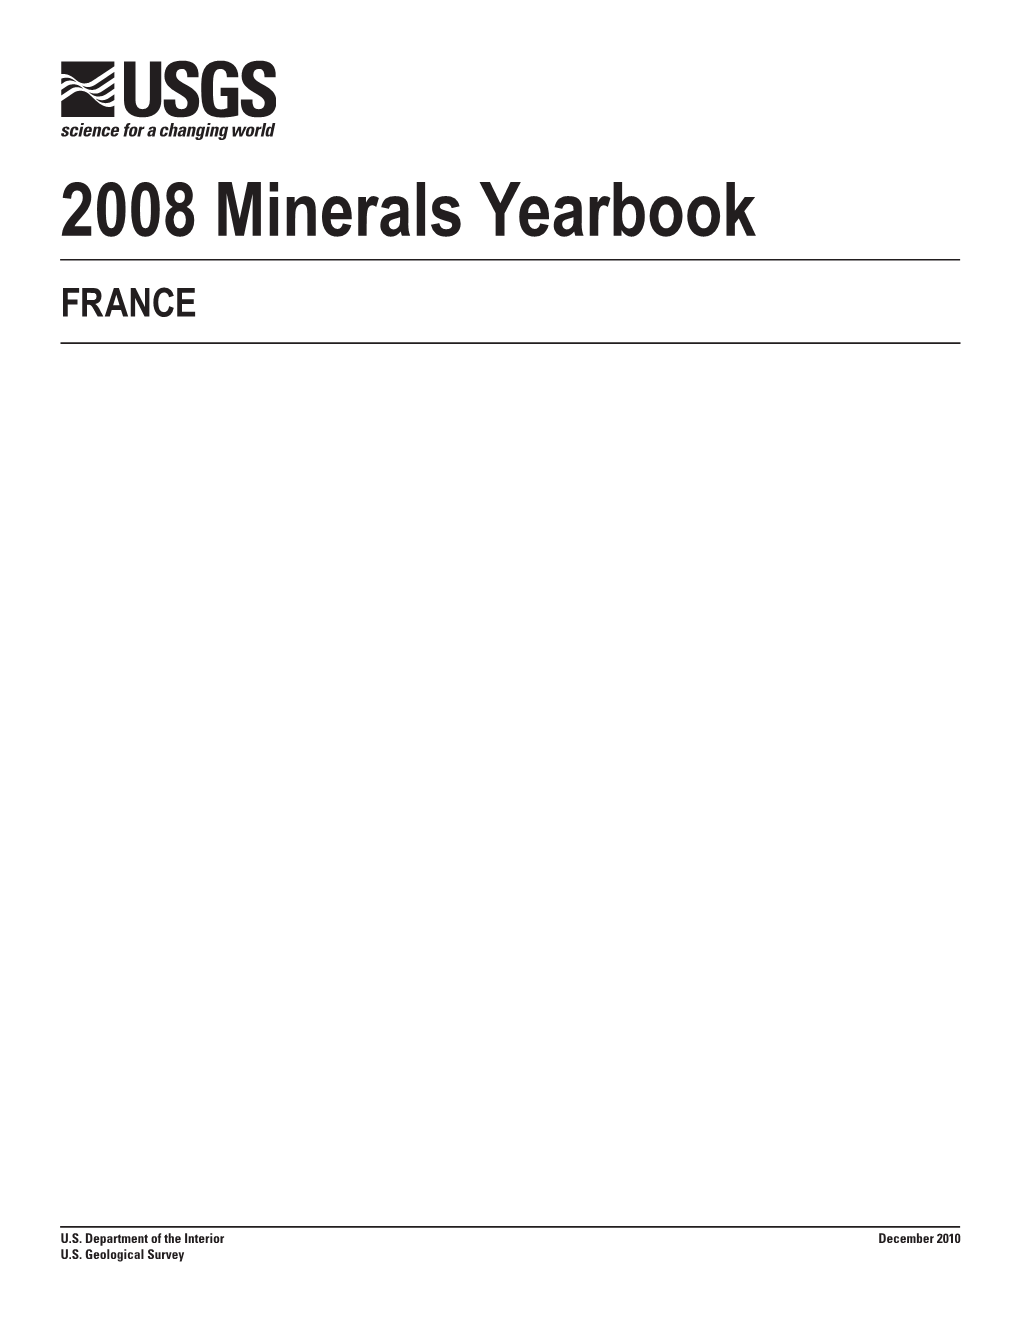 The Mineral Industry of France in 2008